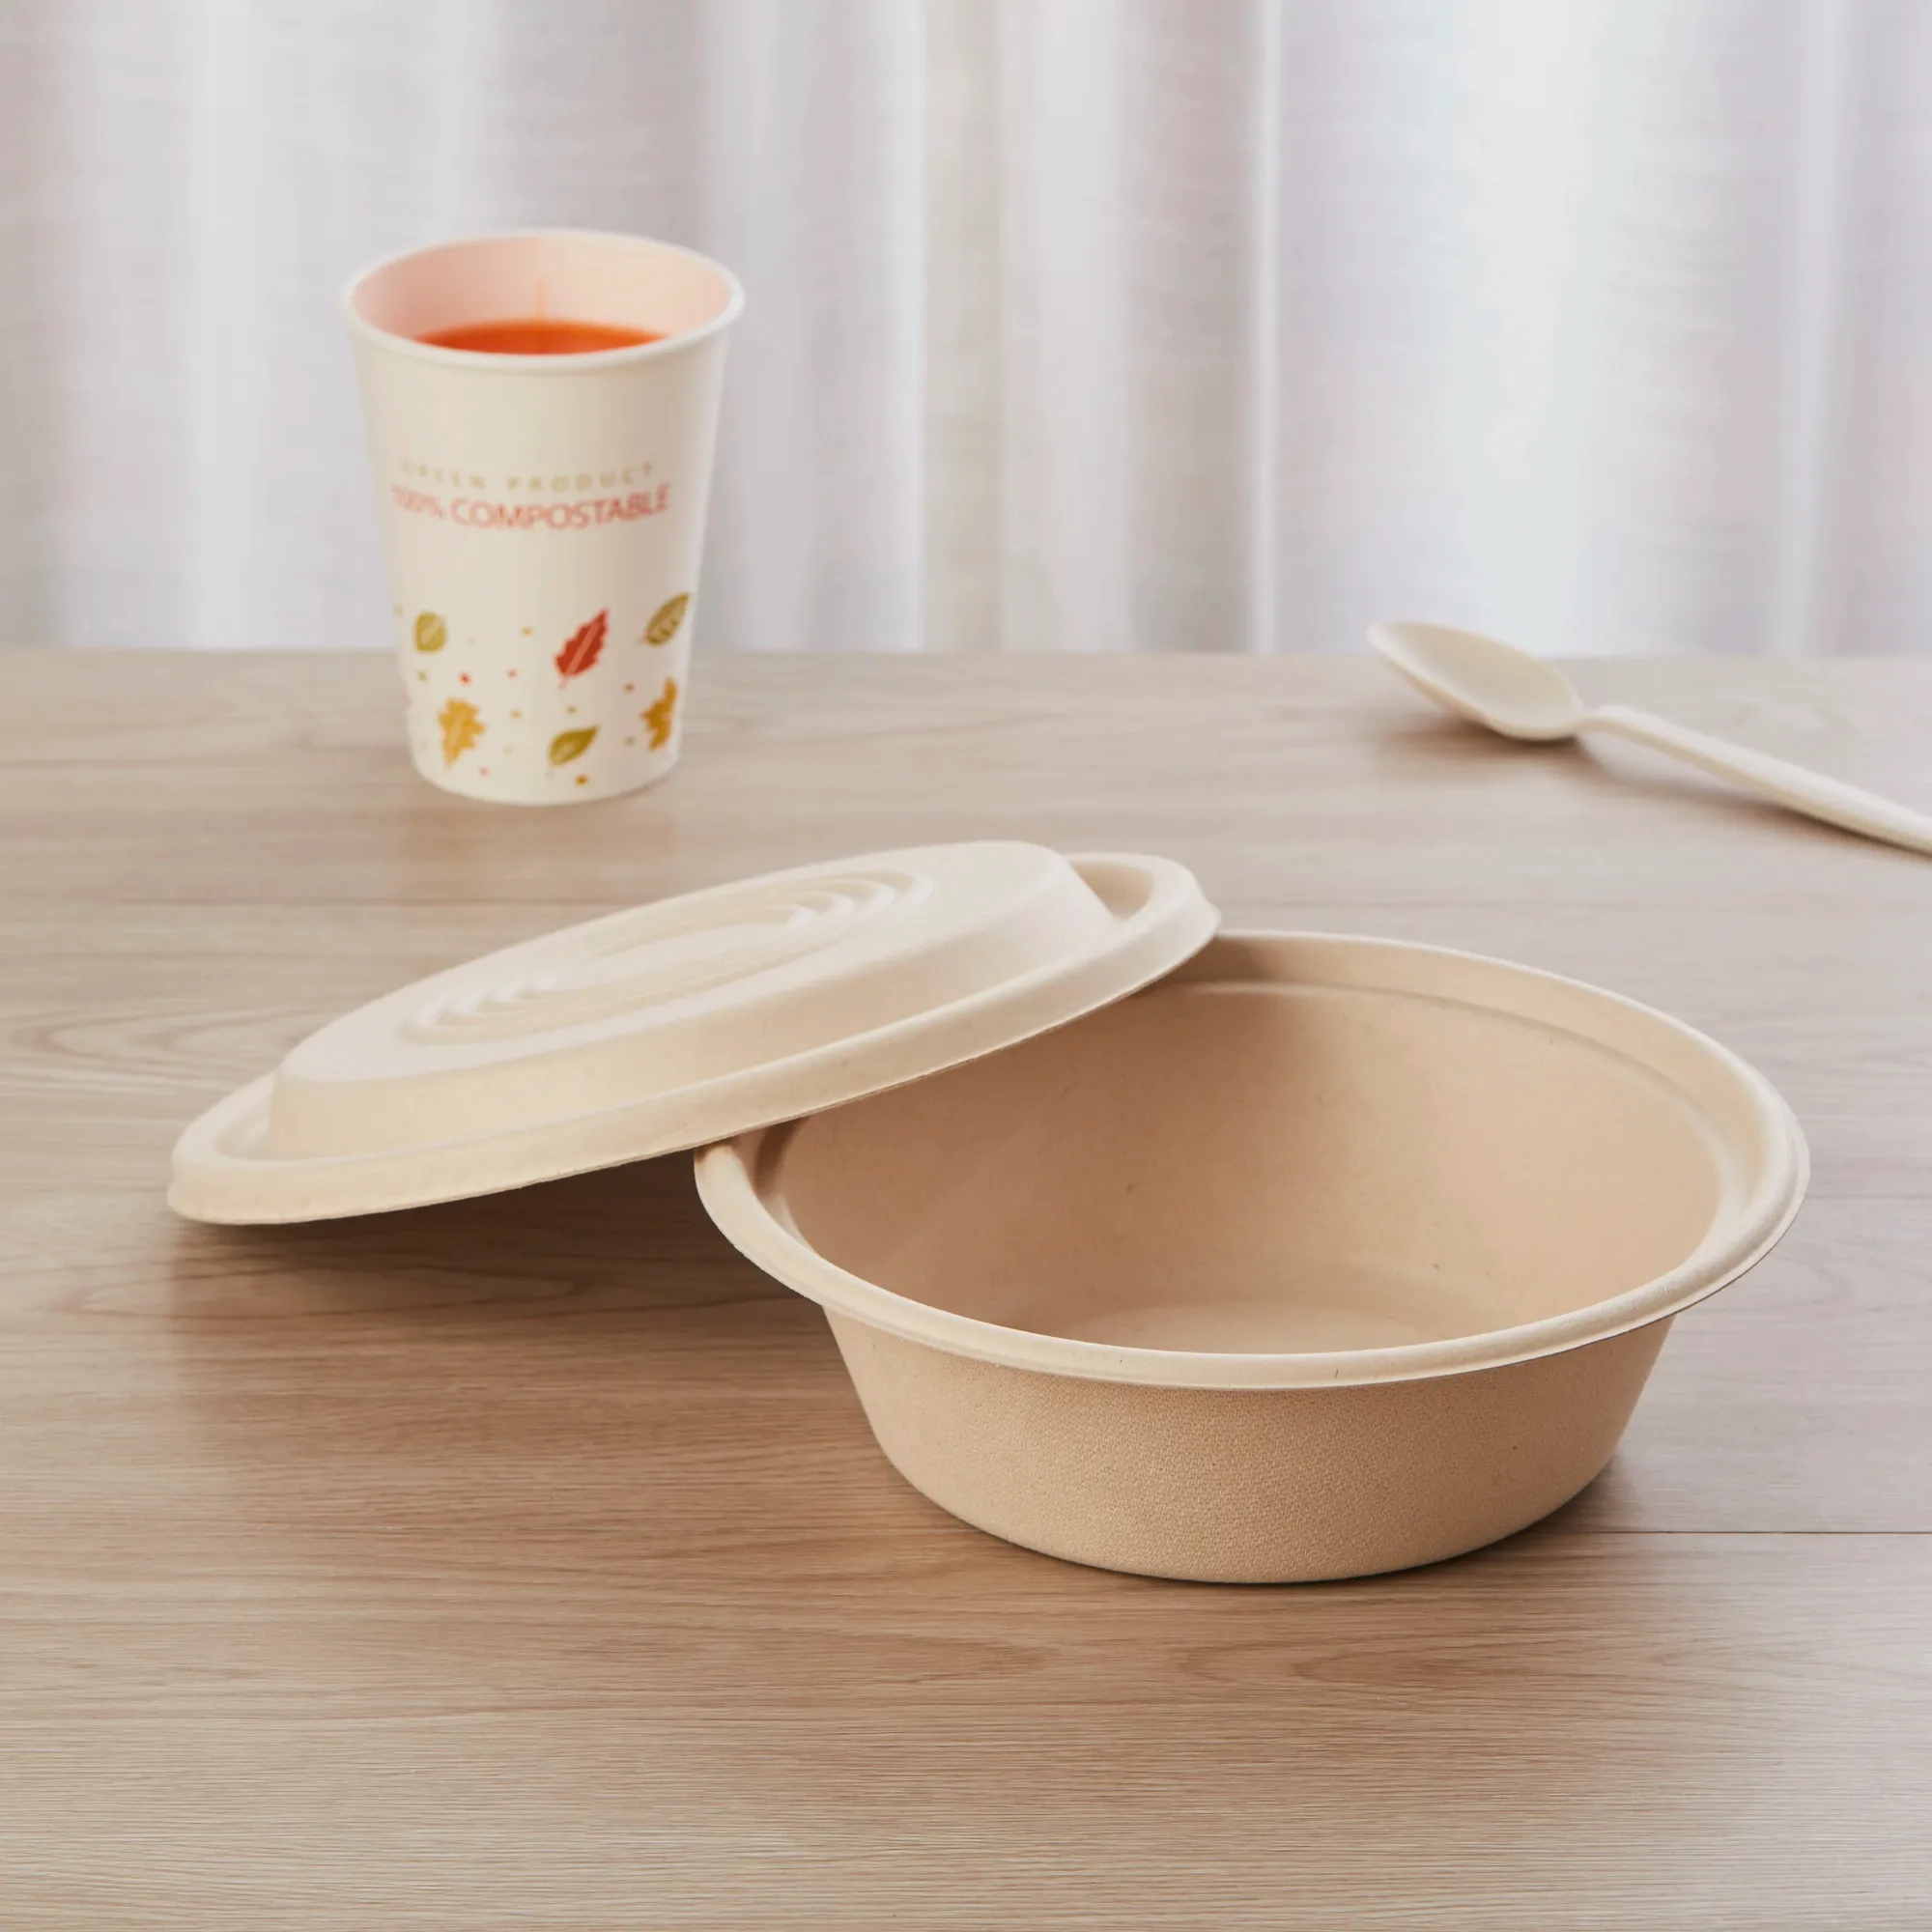 SEALABLE, COMPOSTABLE, FRESH SALAD BOWLS. YES THEY EXIST